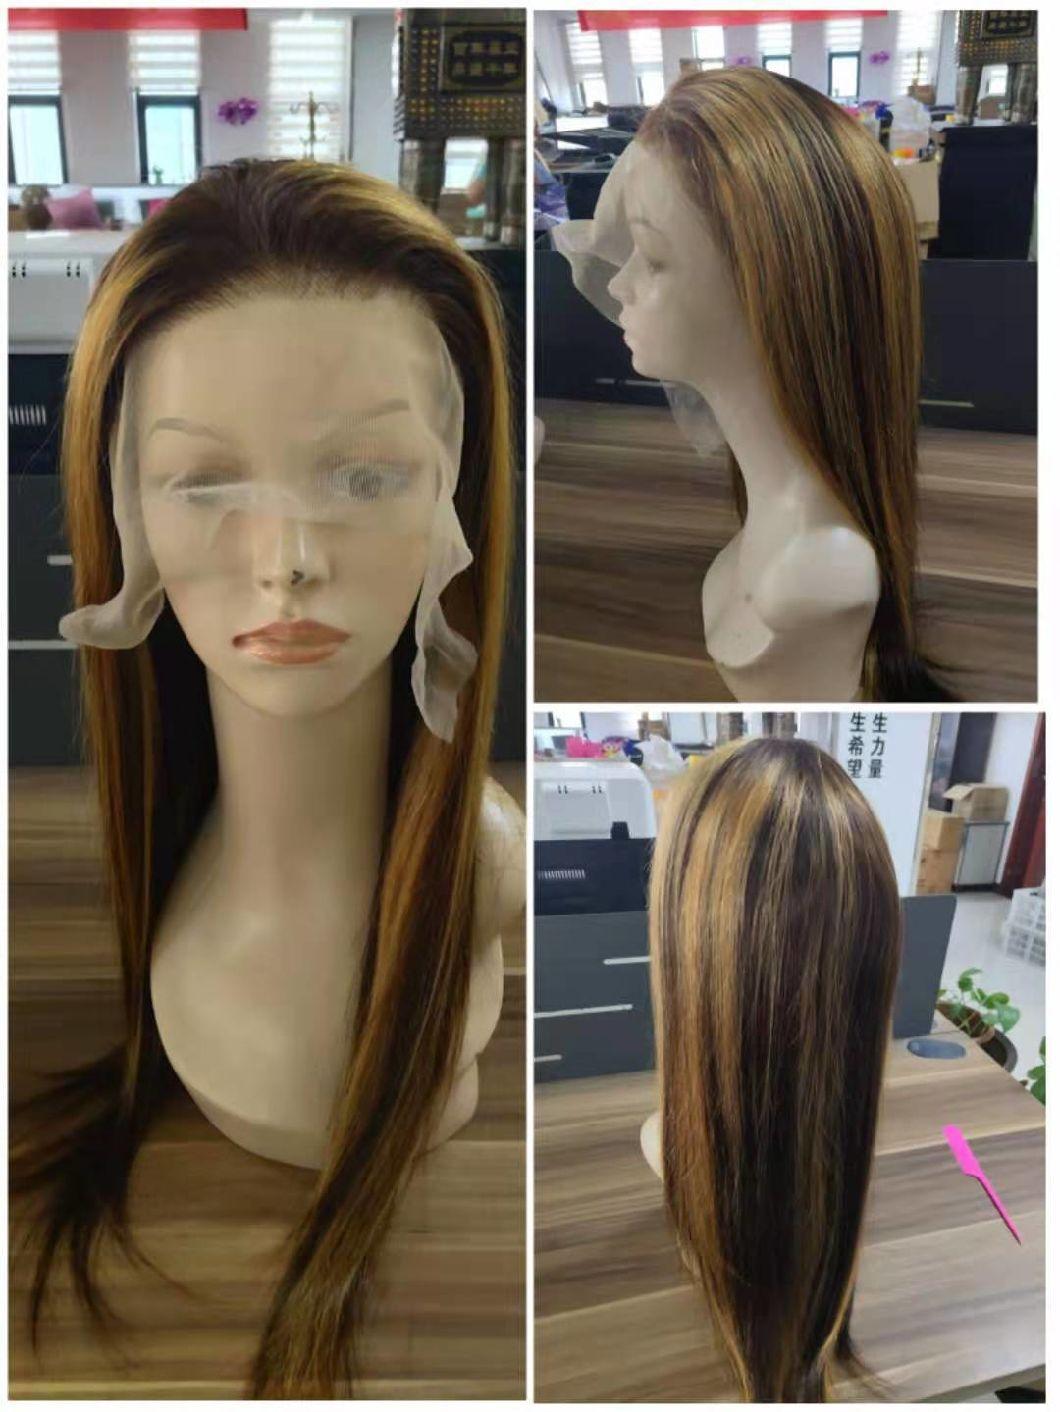 Straight Highlight Wig Human Hair 4/27 Ombre Color Hair 4X4 Lace Closure Human Hair Wigs Brazilian Straight Lace Wigs